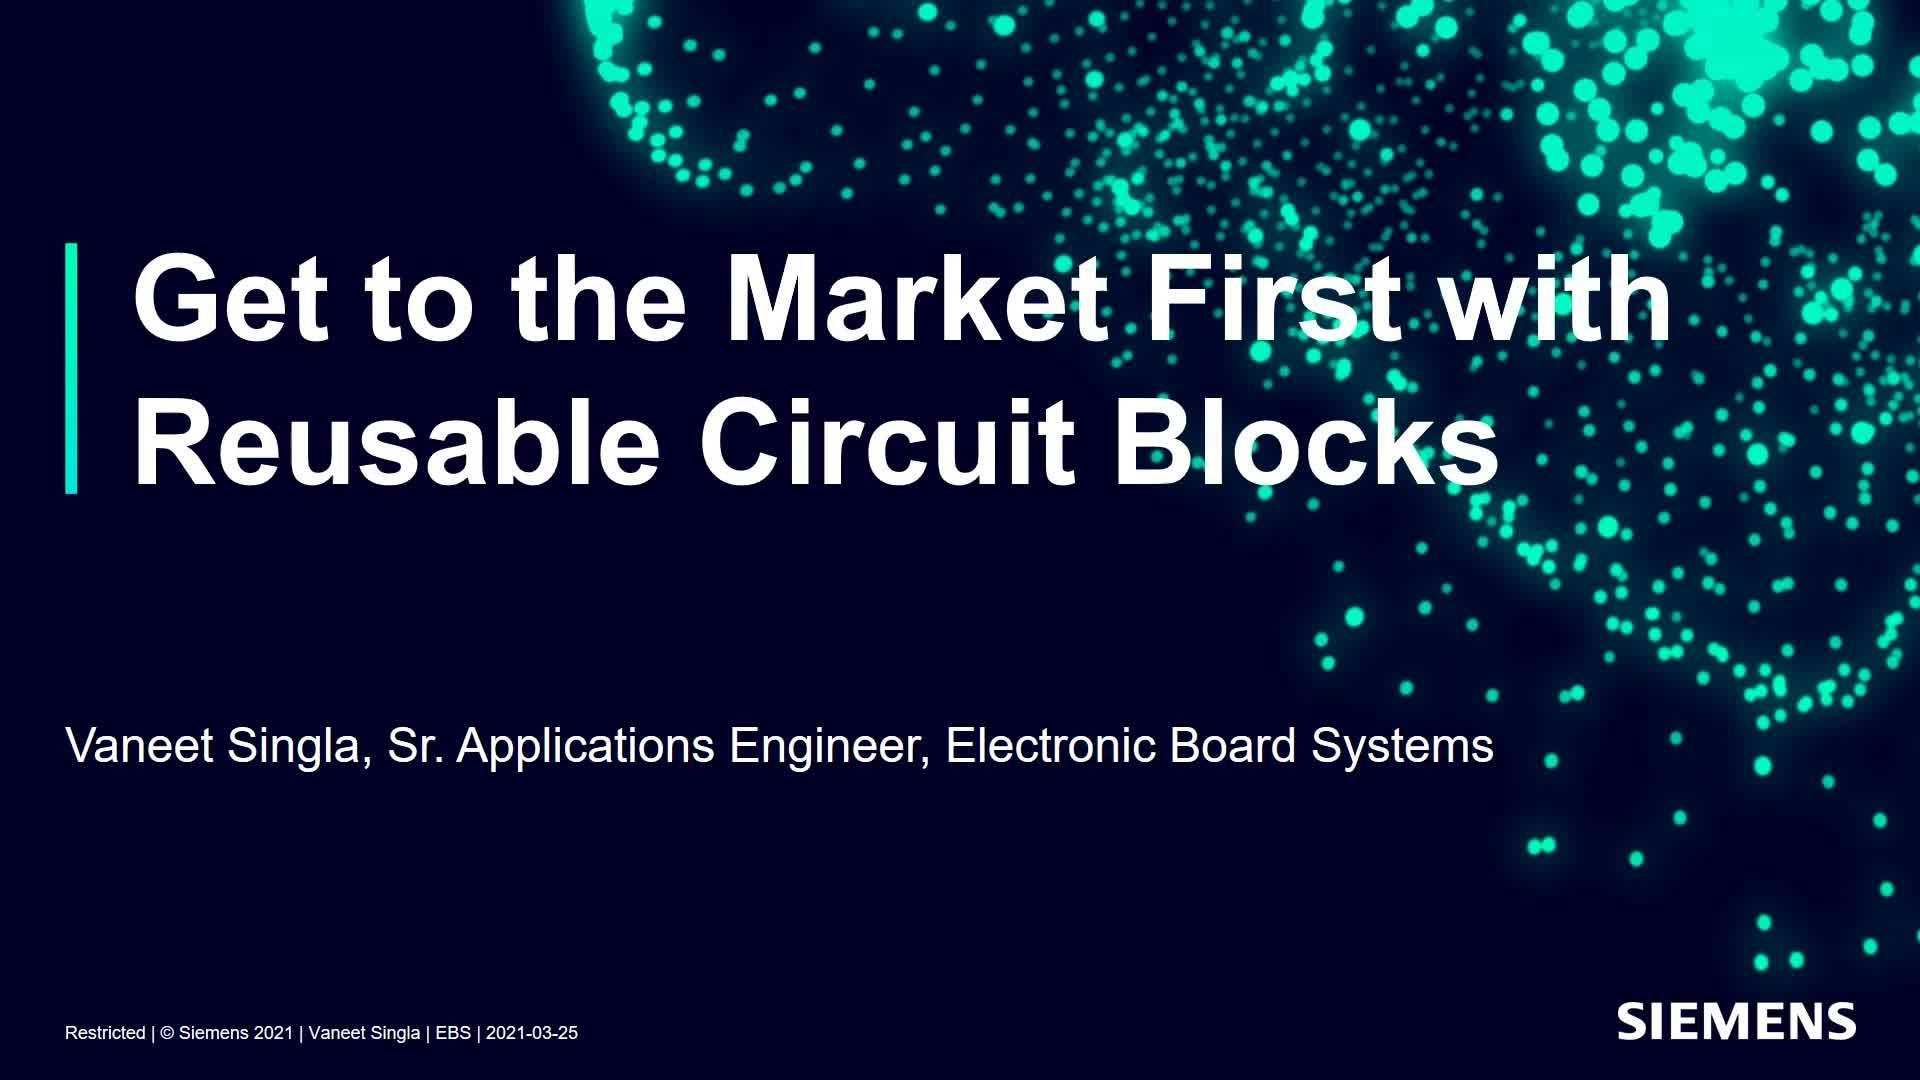 Get to the Market First with Reusable Circuit Blocks